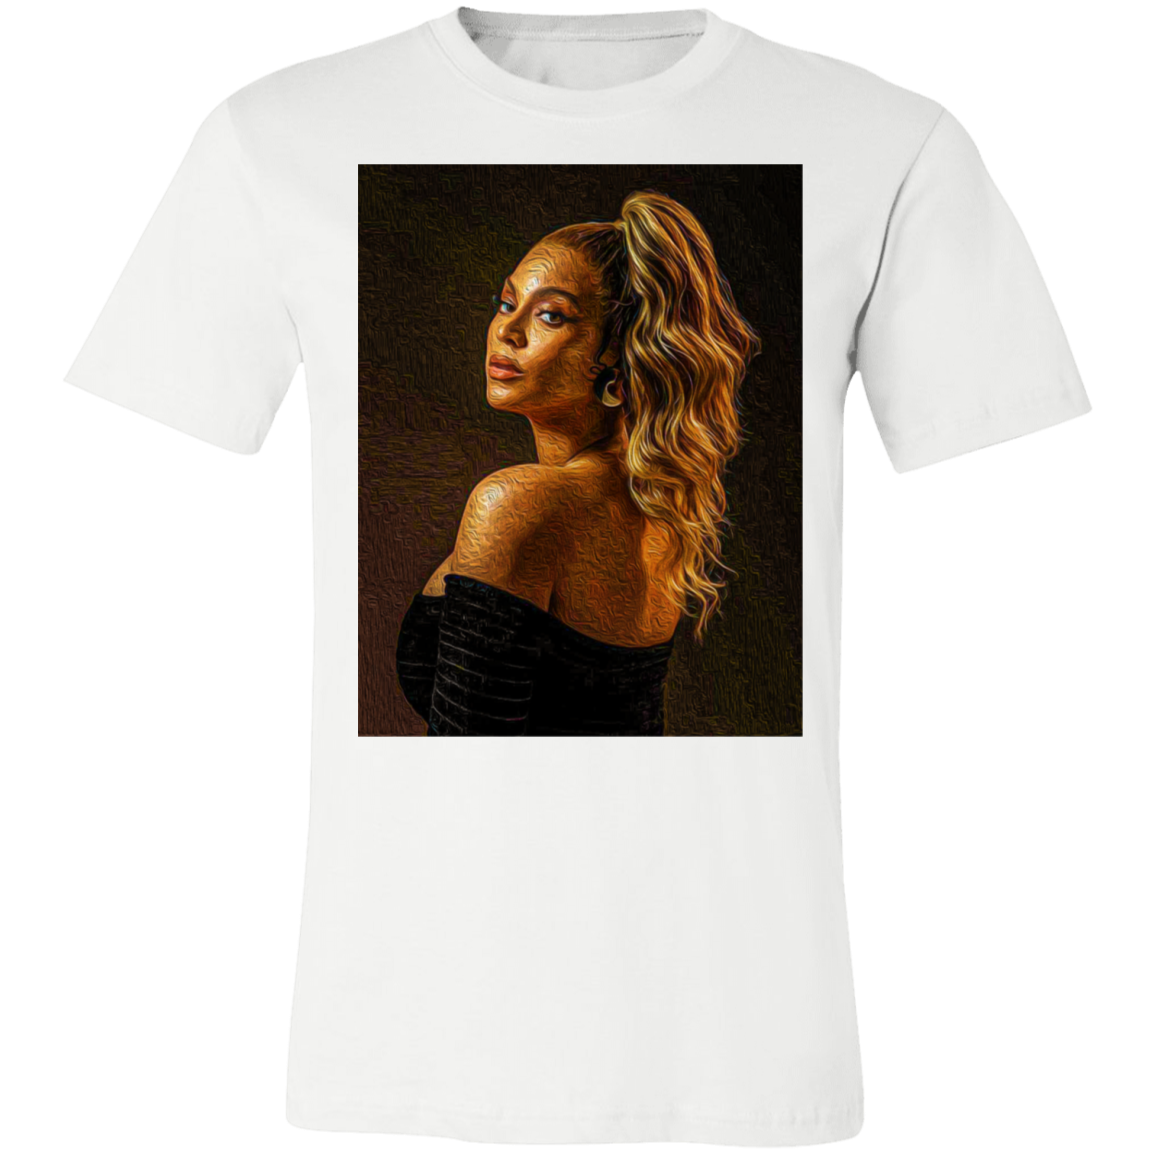 beyoncé graphic tee in white, the tee has a dark brown background